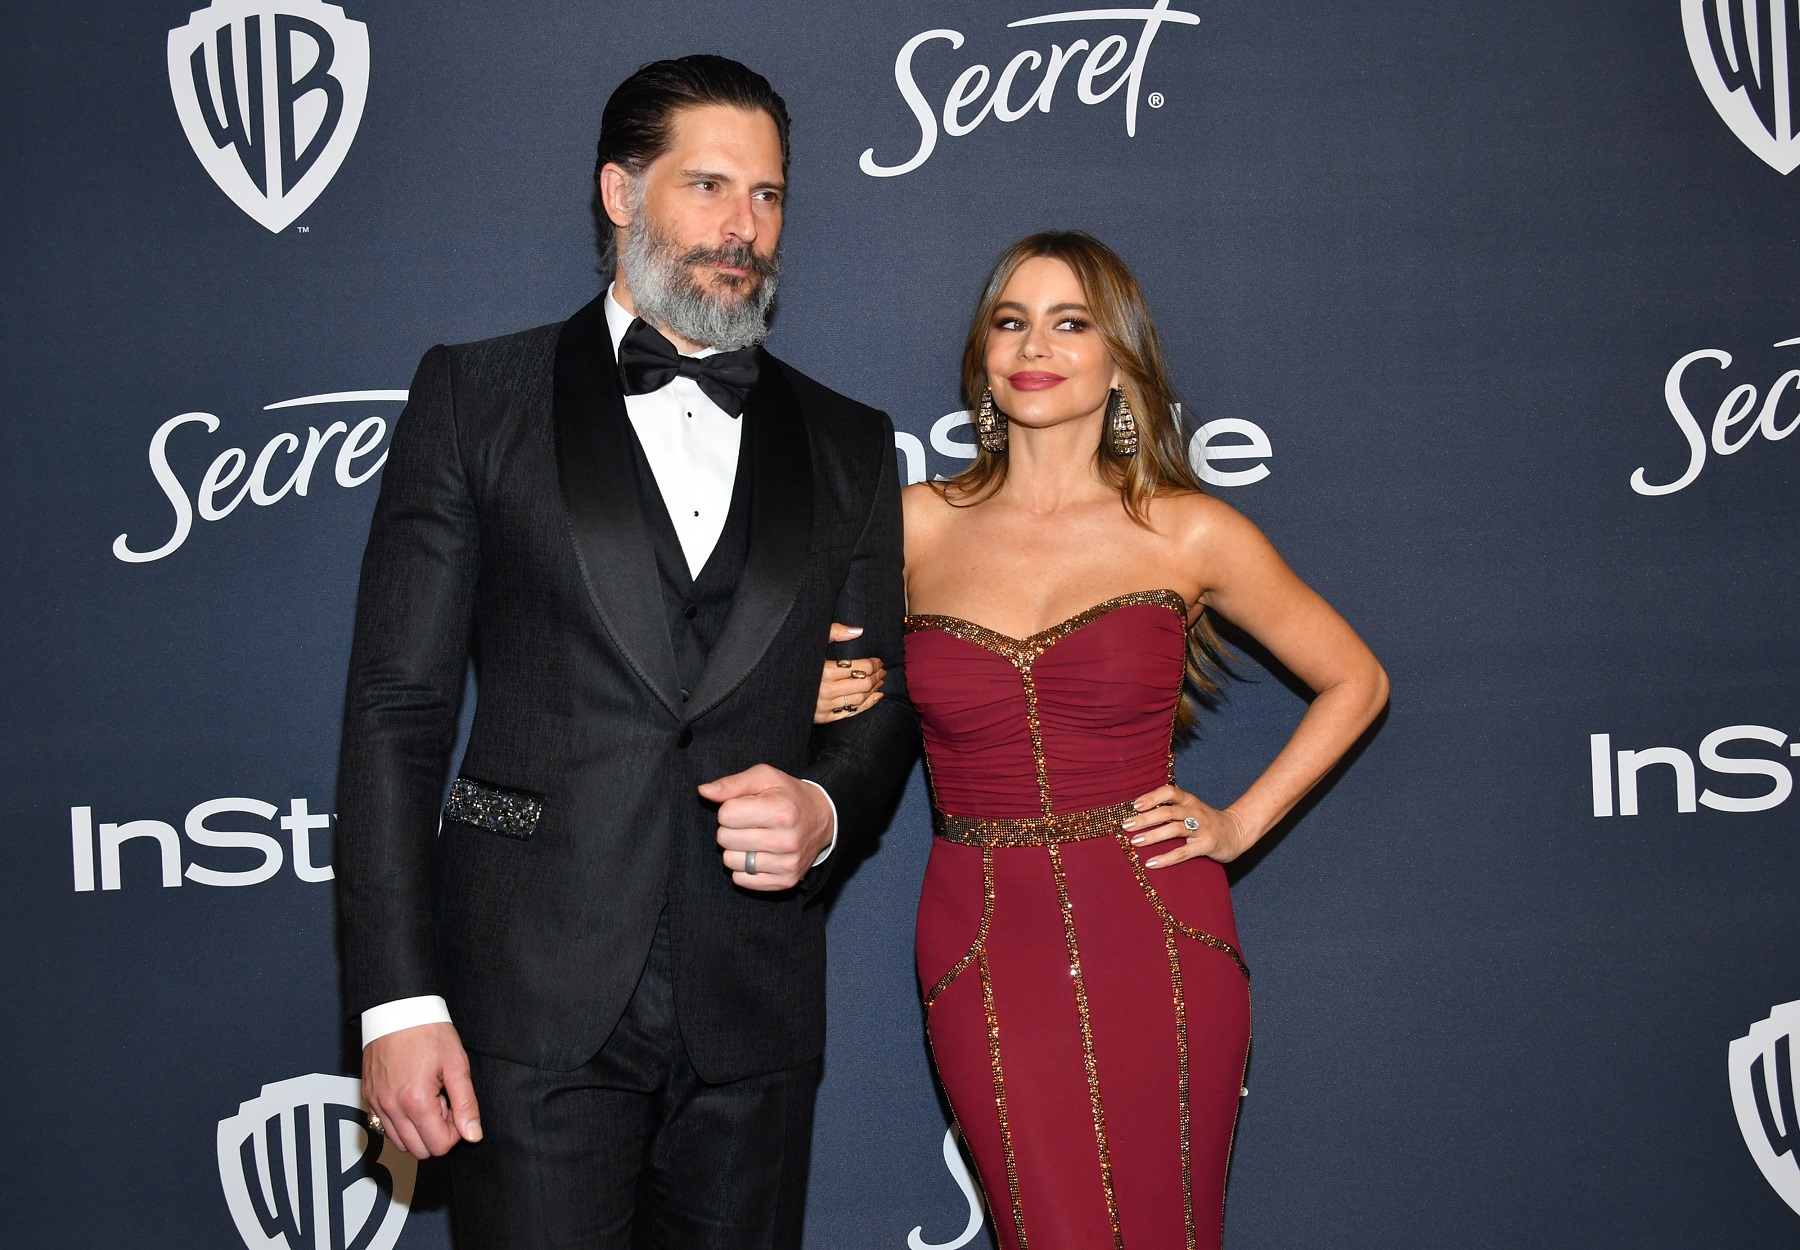 BEVERLY HILLS, CALIFORNIA - JANUARY 05: (L-R) Joe Manganiello and Sofía Vergara attend the 21st Annual Warner Bros. And InStyle Golden Globe After Party at The Beverly Hilton Hotel on January 05, 2020 in Beverly Hills, California. (Photo by Amy Sussman/Getty Images)